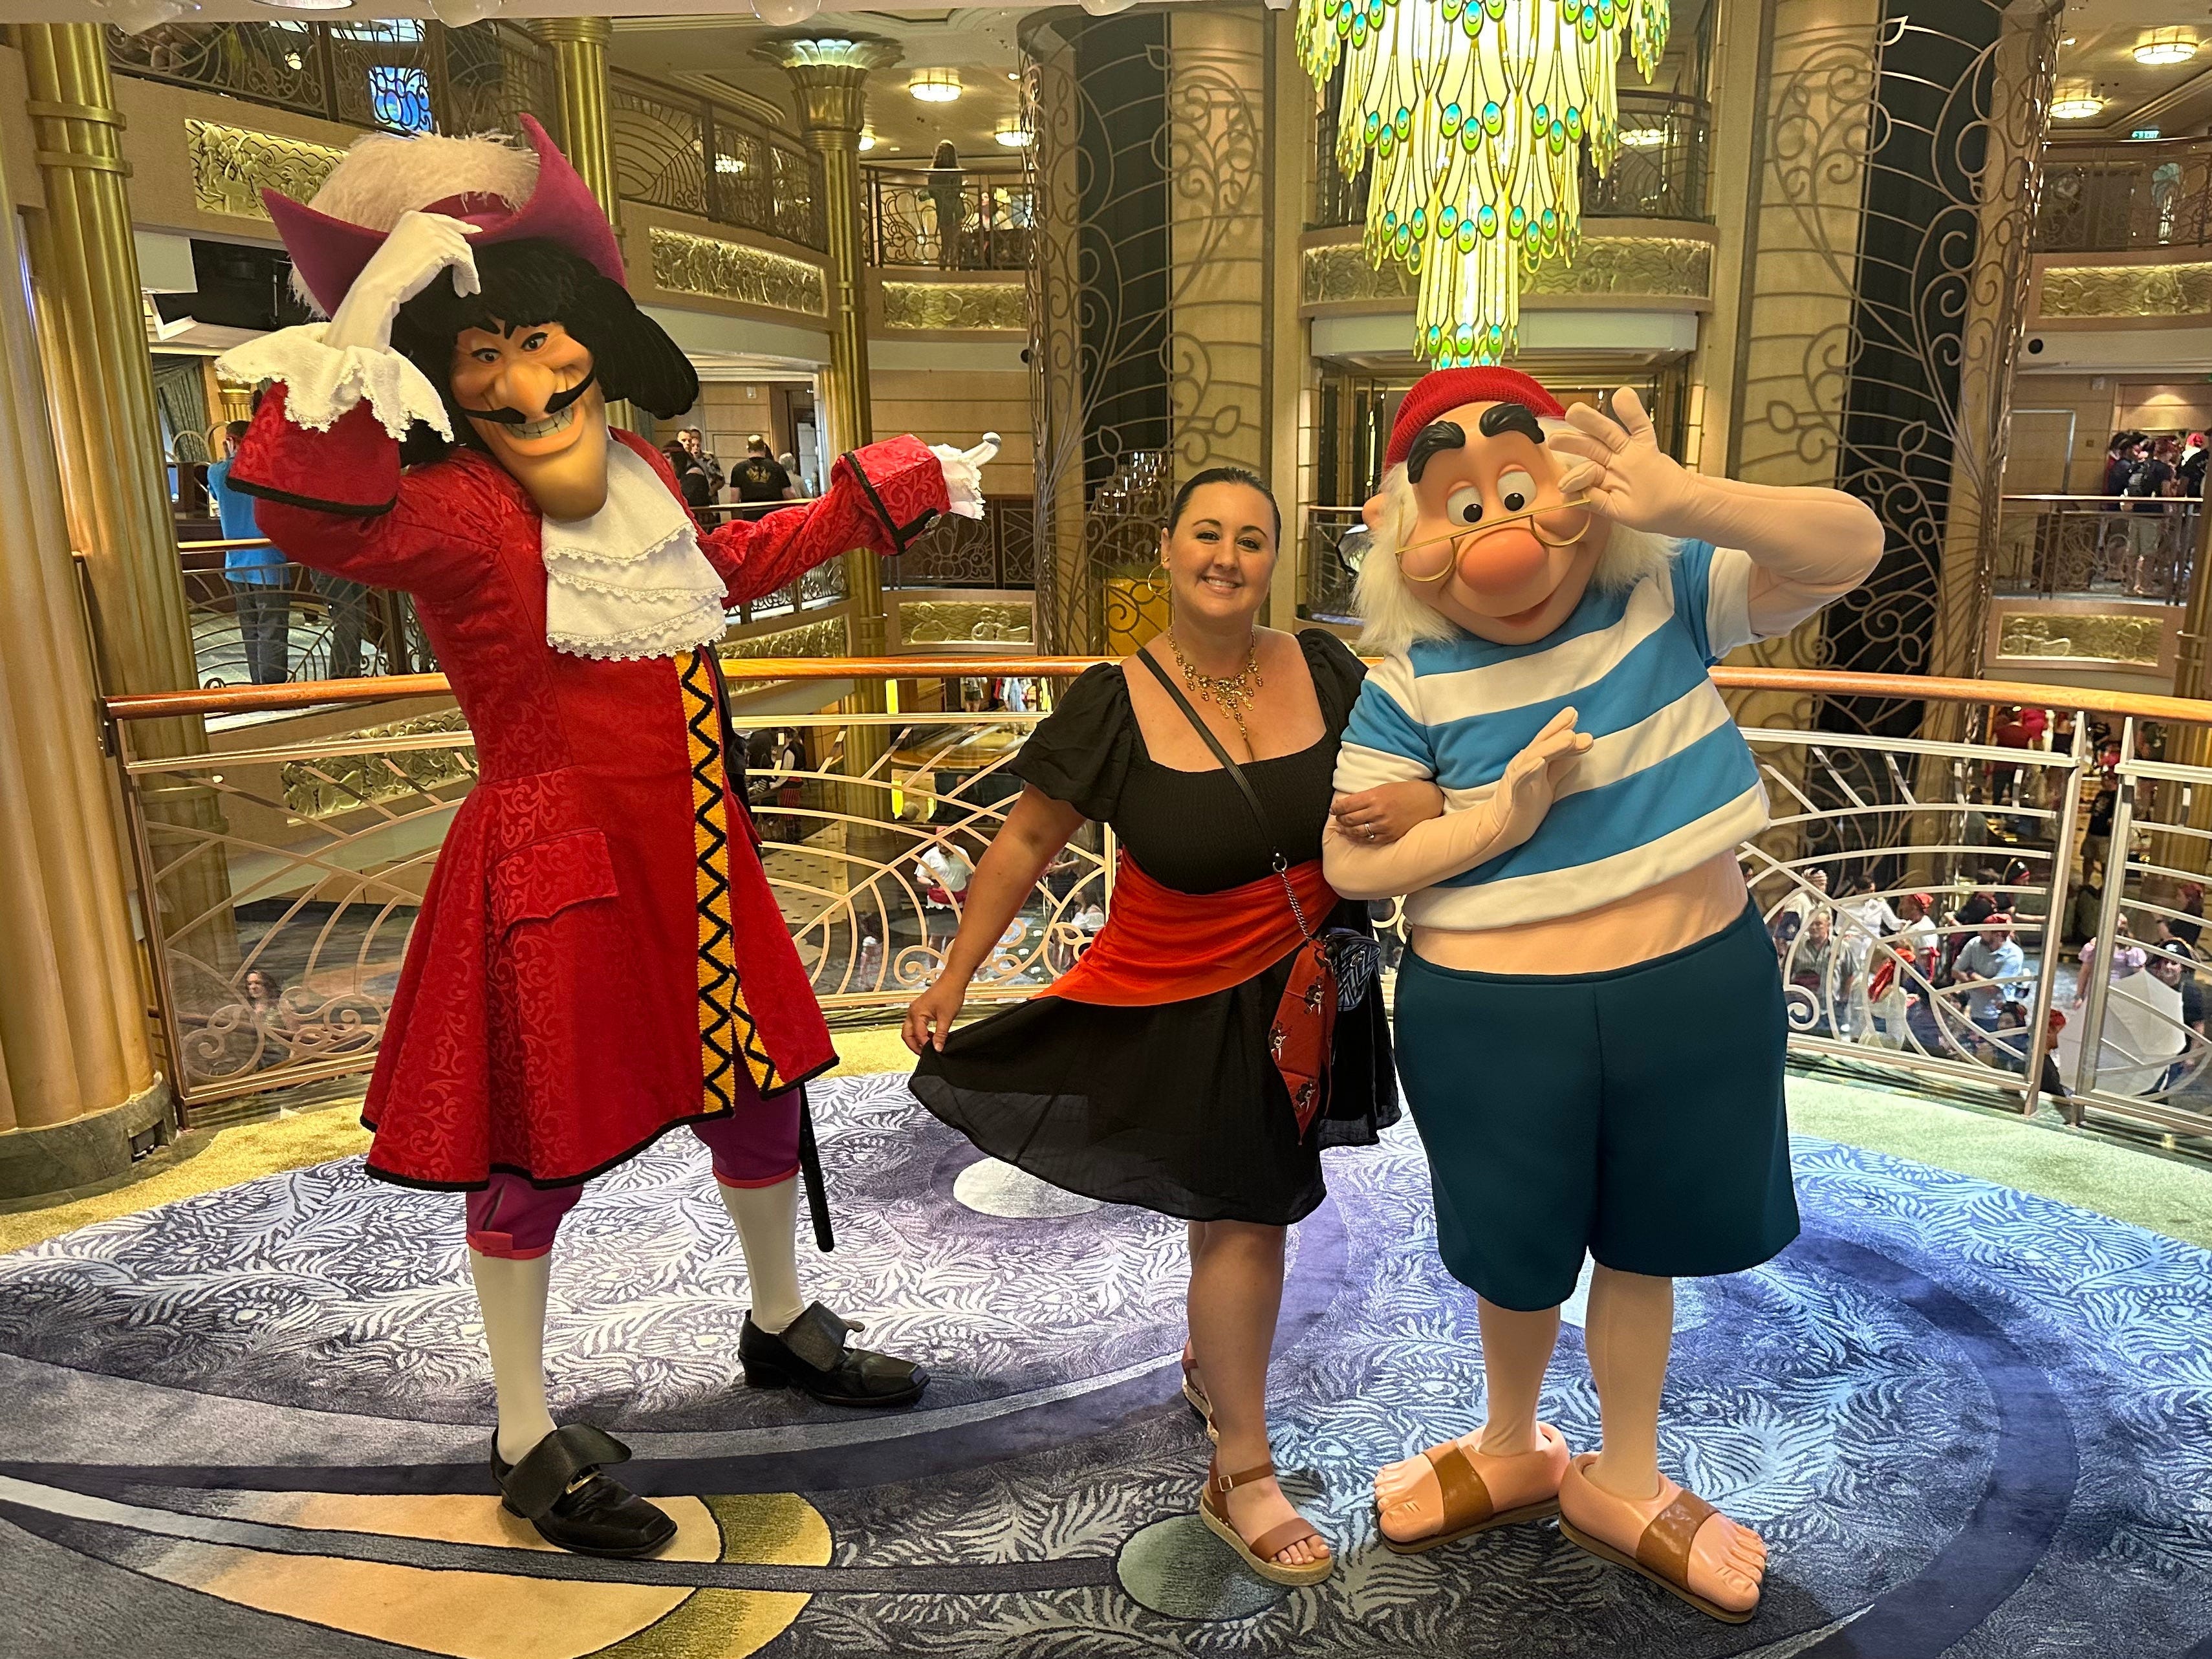 <p>I find a lot of cruise lines don't offer enough activities beyond relaxing poolside. But this is never an issue on Disney Cruise Line or <a href="https://www.businessinsider.com/royal-caribbean-symphony-of-seas-cheapest-cabin-review-interior-stateroom-photos-2023">Royal Caribbean ships</a>. Both lines offer extensive programming that goes far beyond the usual trivia and napkin-folding classes.</p><p>Some Royal Caribbean ships like Icon of the Seas and Wonder of the Seas have full water parks on board. In fact, Icon of the Seas has the <a href="https://abcnews.go.com/GMA/Travel/royal-caribbeans-icon-seas-designed-families-mind/story?id=106778216">largest water park at sea</a>. There's also plenty to do as a thrill lover, like Royal Caribbean's Crown's Edge, a skywalk-and-ropes course on Icon of the Seas that left me suspended over the ocean.</p><p>When I'm on a Disney ship, some of my favorite activities include animation classes and <a href="https://www.businessinsider.com/how-to-meet-every-character-disney-world-one-day-tips-2023-6">character meet-and-greets</a>, which are available fleet-wide.</p>